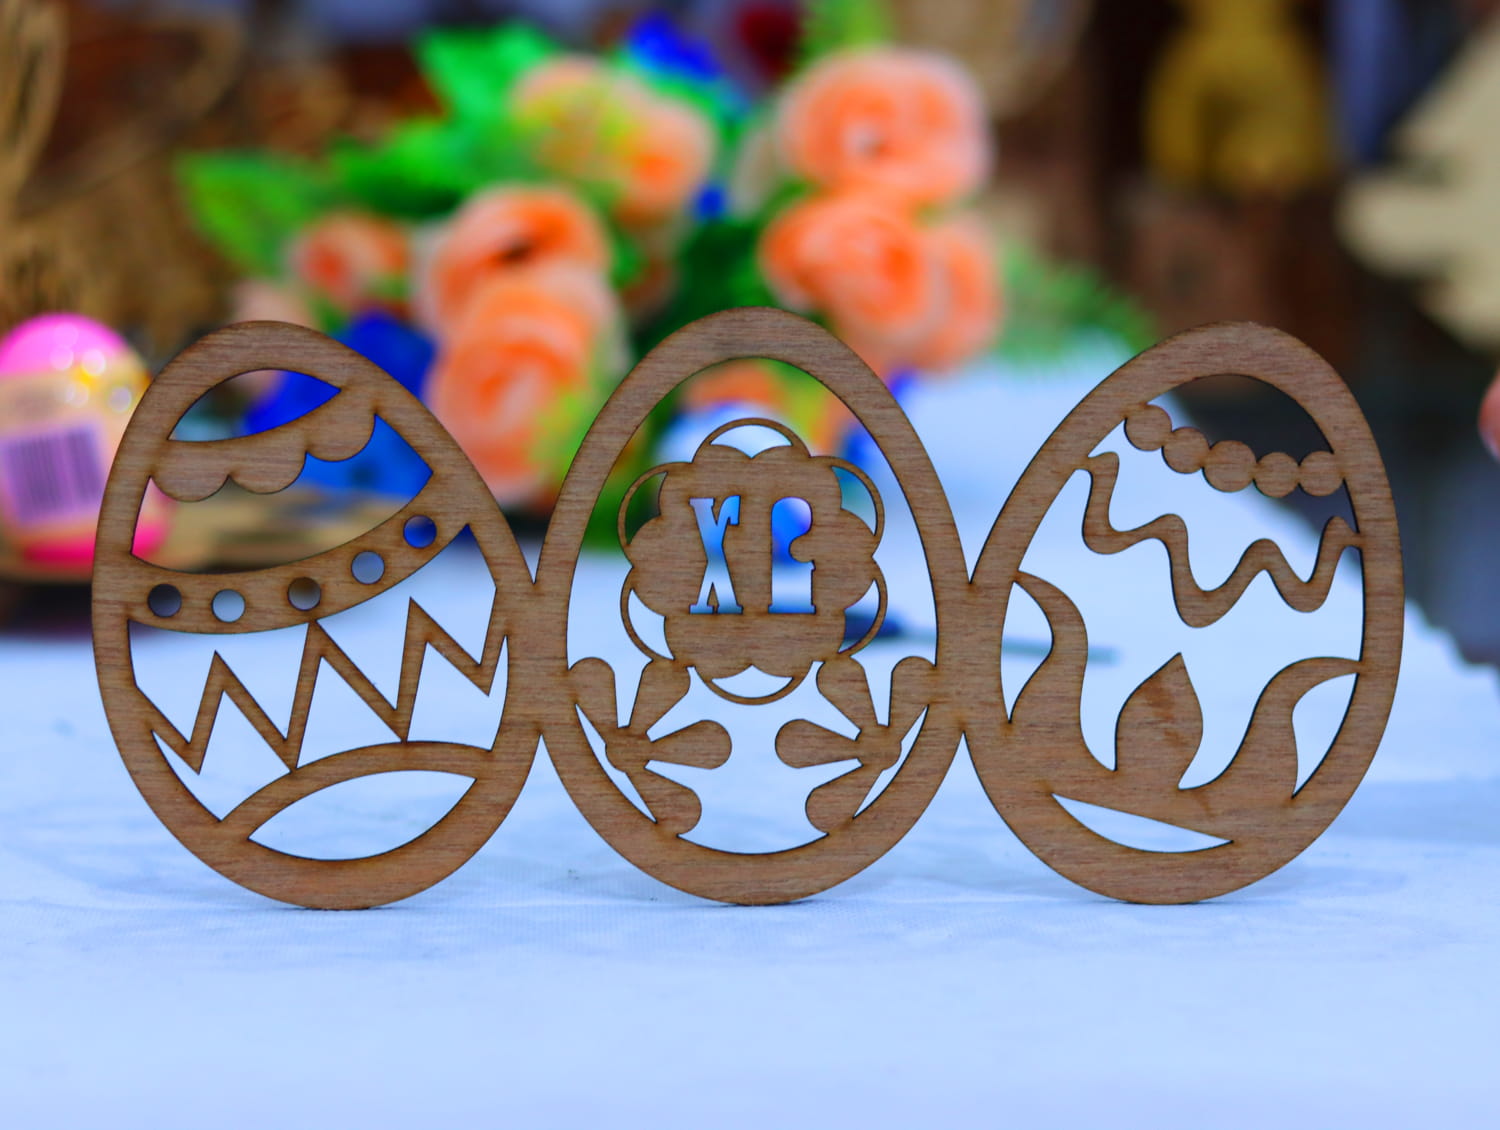 Laser Cut Wooden Easter Eggs Free Vector